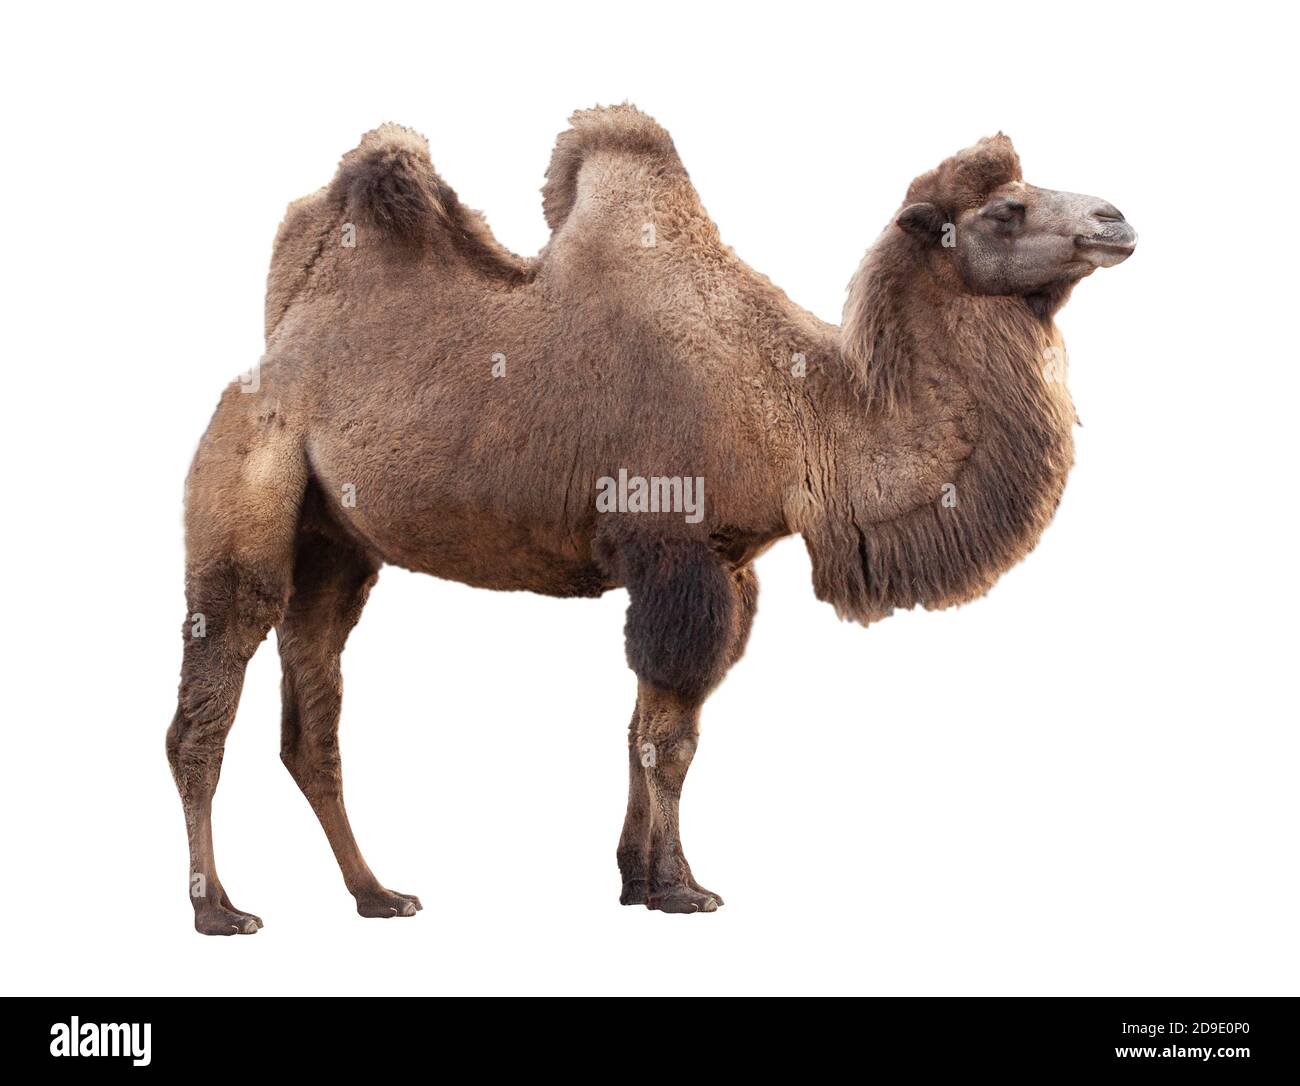 Camel isolated on white background.  An even-toed ungulate in the genus Camelus. Stock Photo